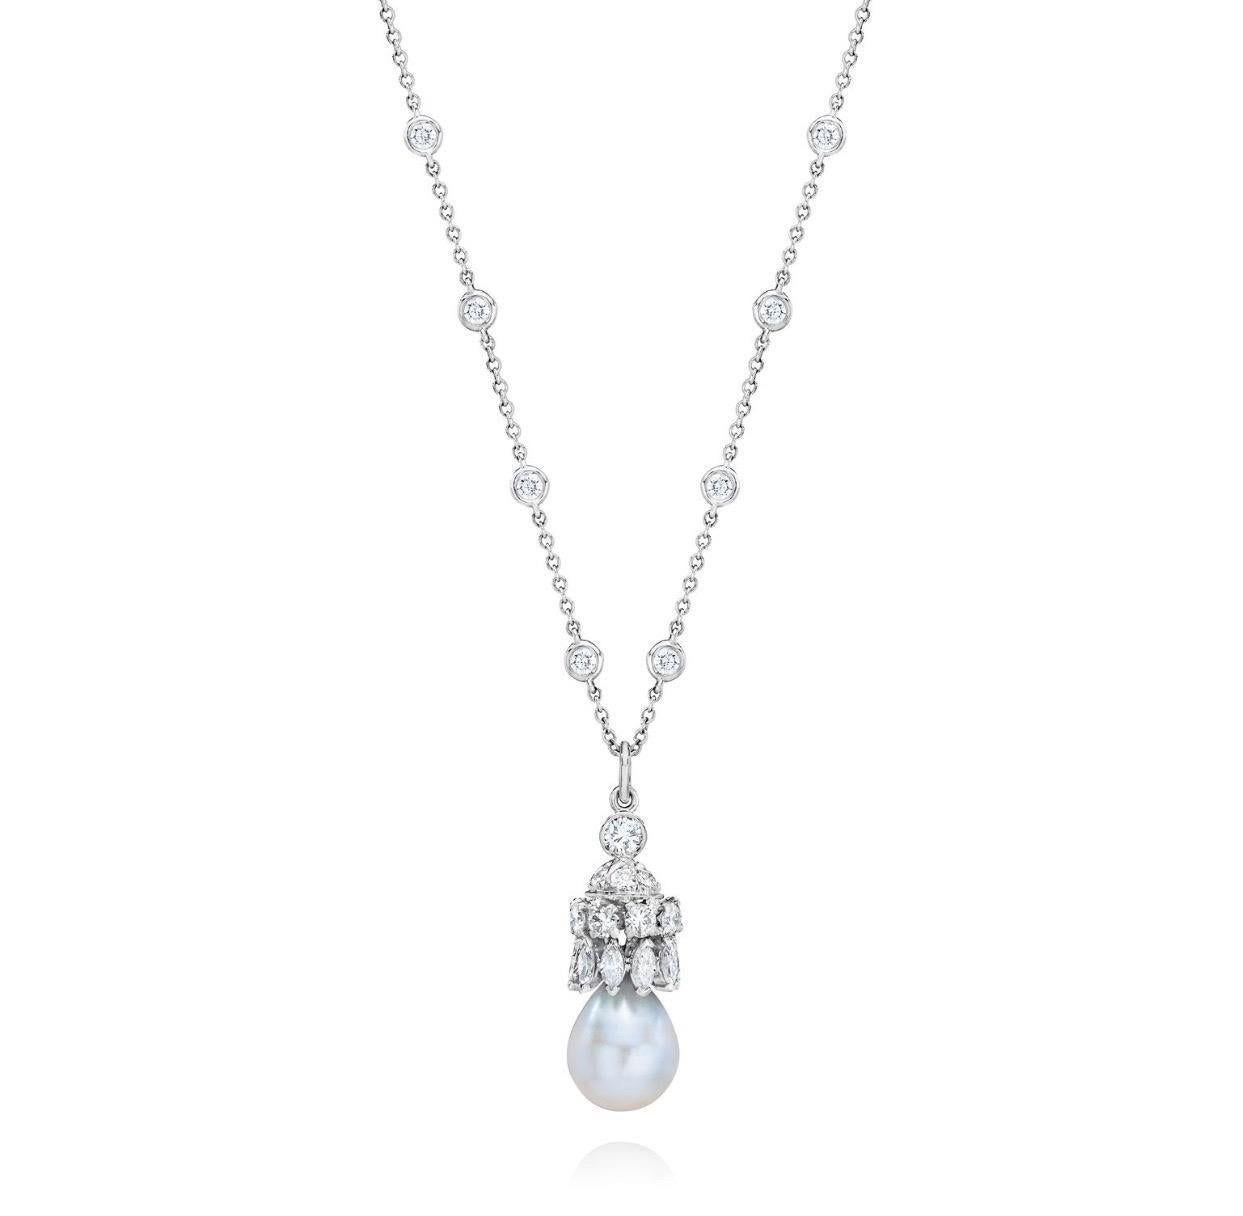 One of a kind MMNY Reconceived Collection. 
Delicate yet dazzling! Classic yet Chic! 
A necklace to enjoy for years to come. “Heirloom Jewels”
1 cultured Pearl @ approx. 11.0 x 9.4mm
Clean High luster AAA
15 round brilliant & 10 Marquise brilliant =